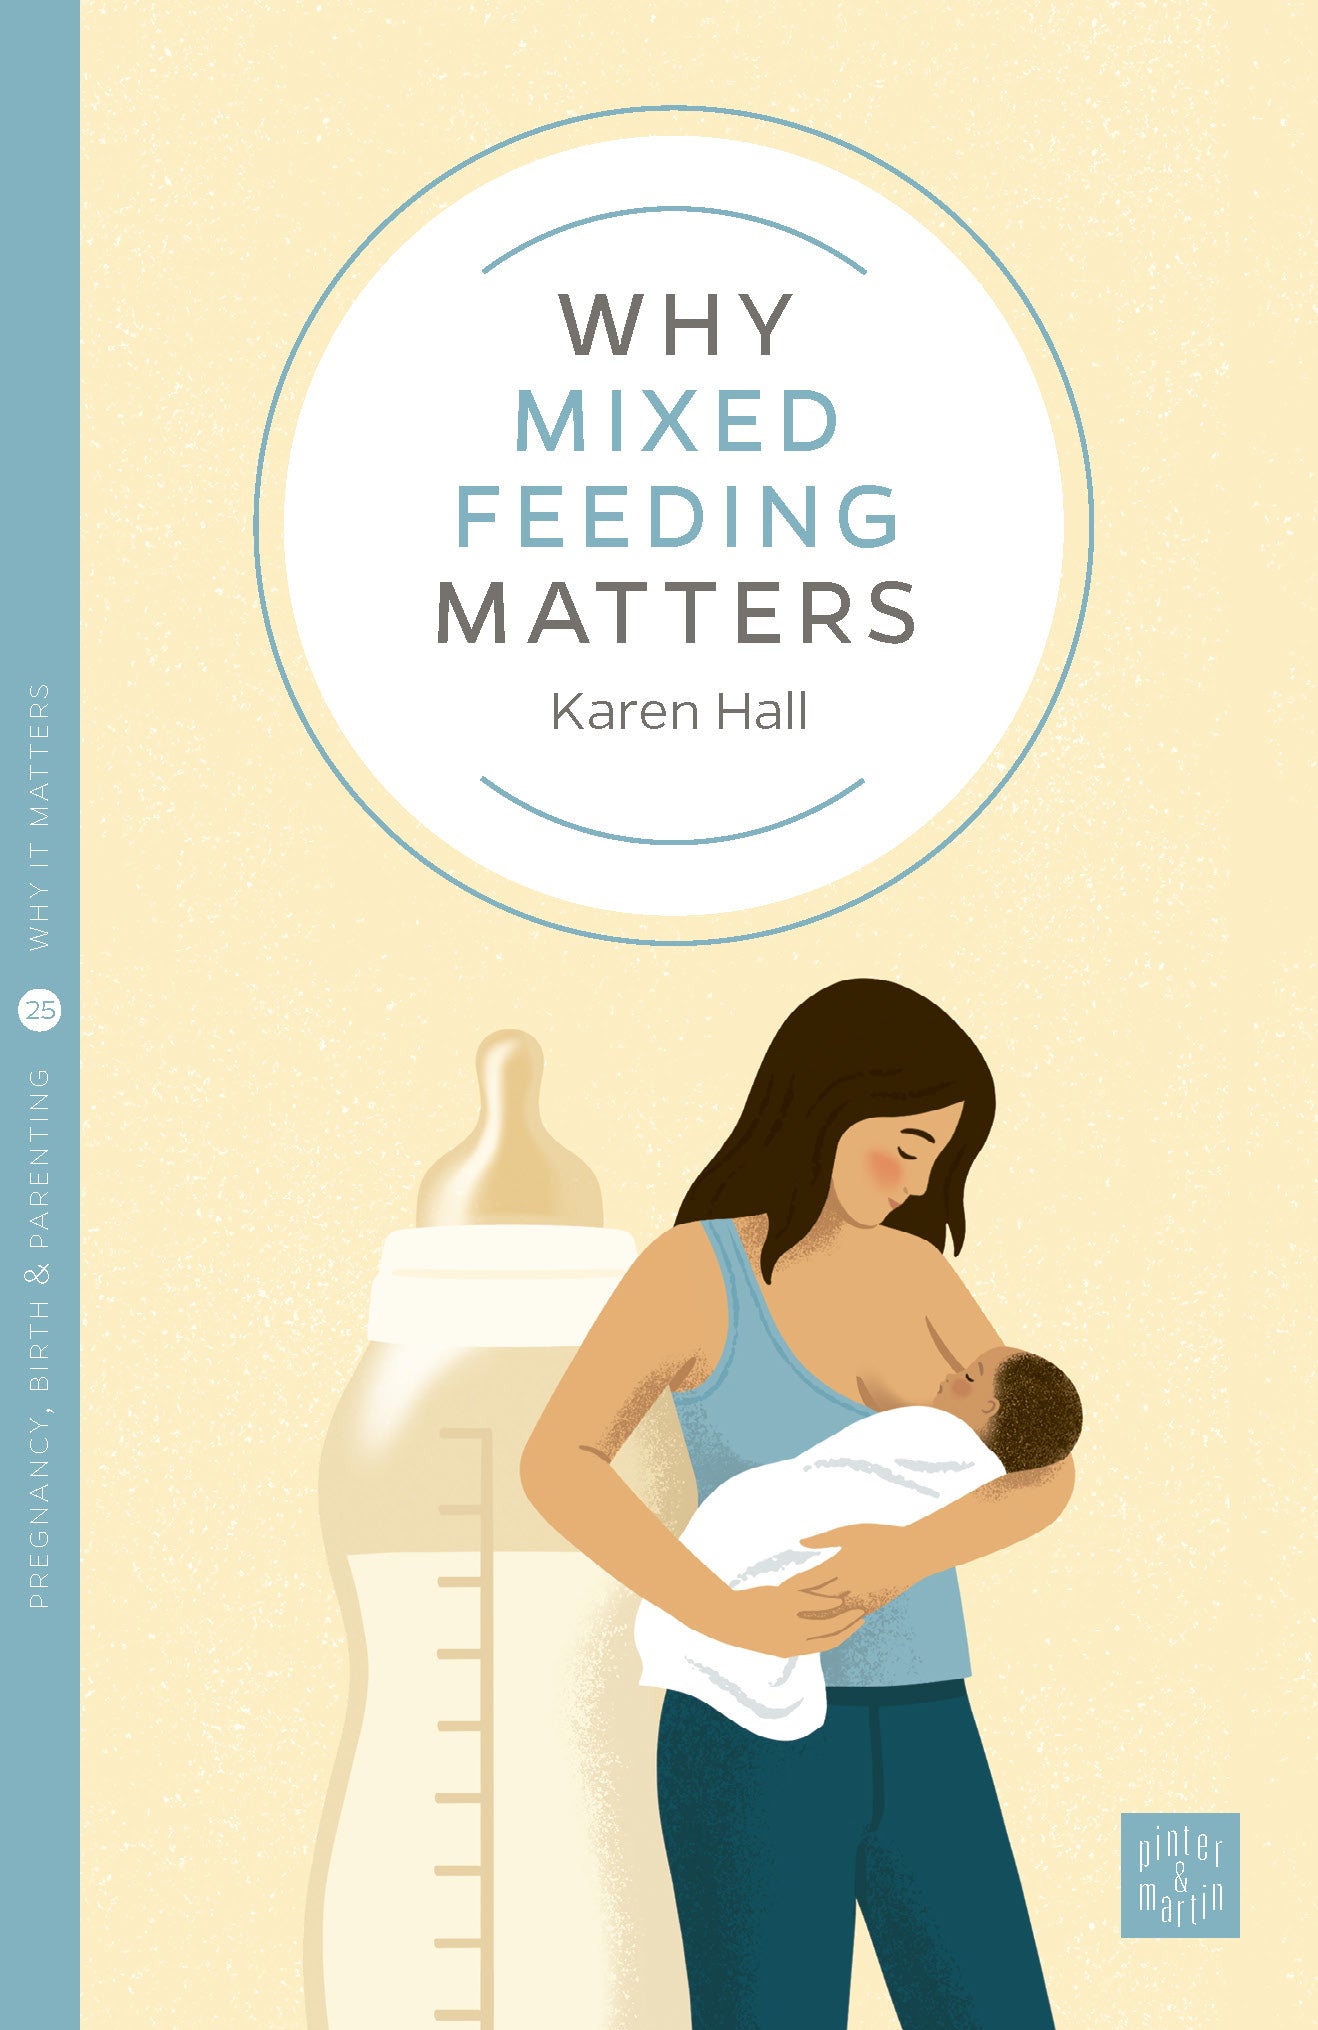 Why Mixed Feeding Matters